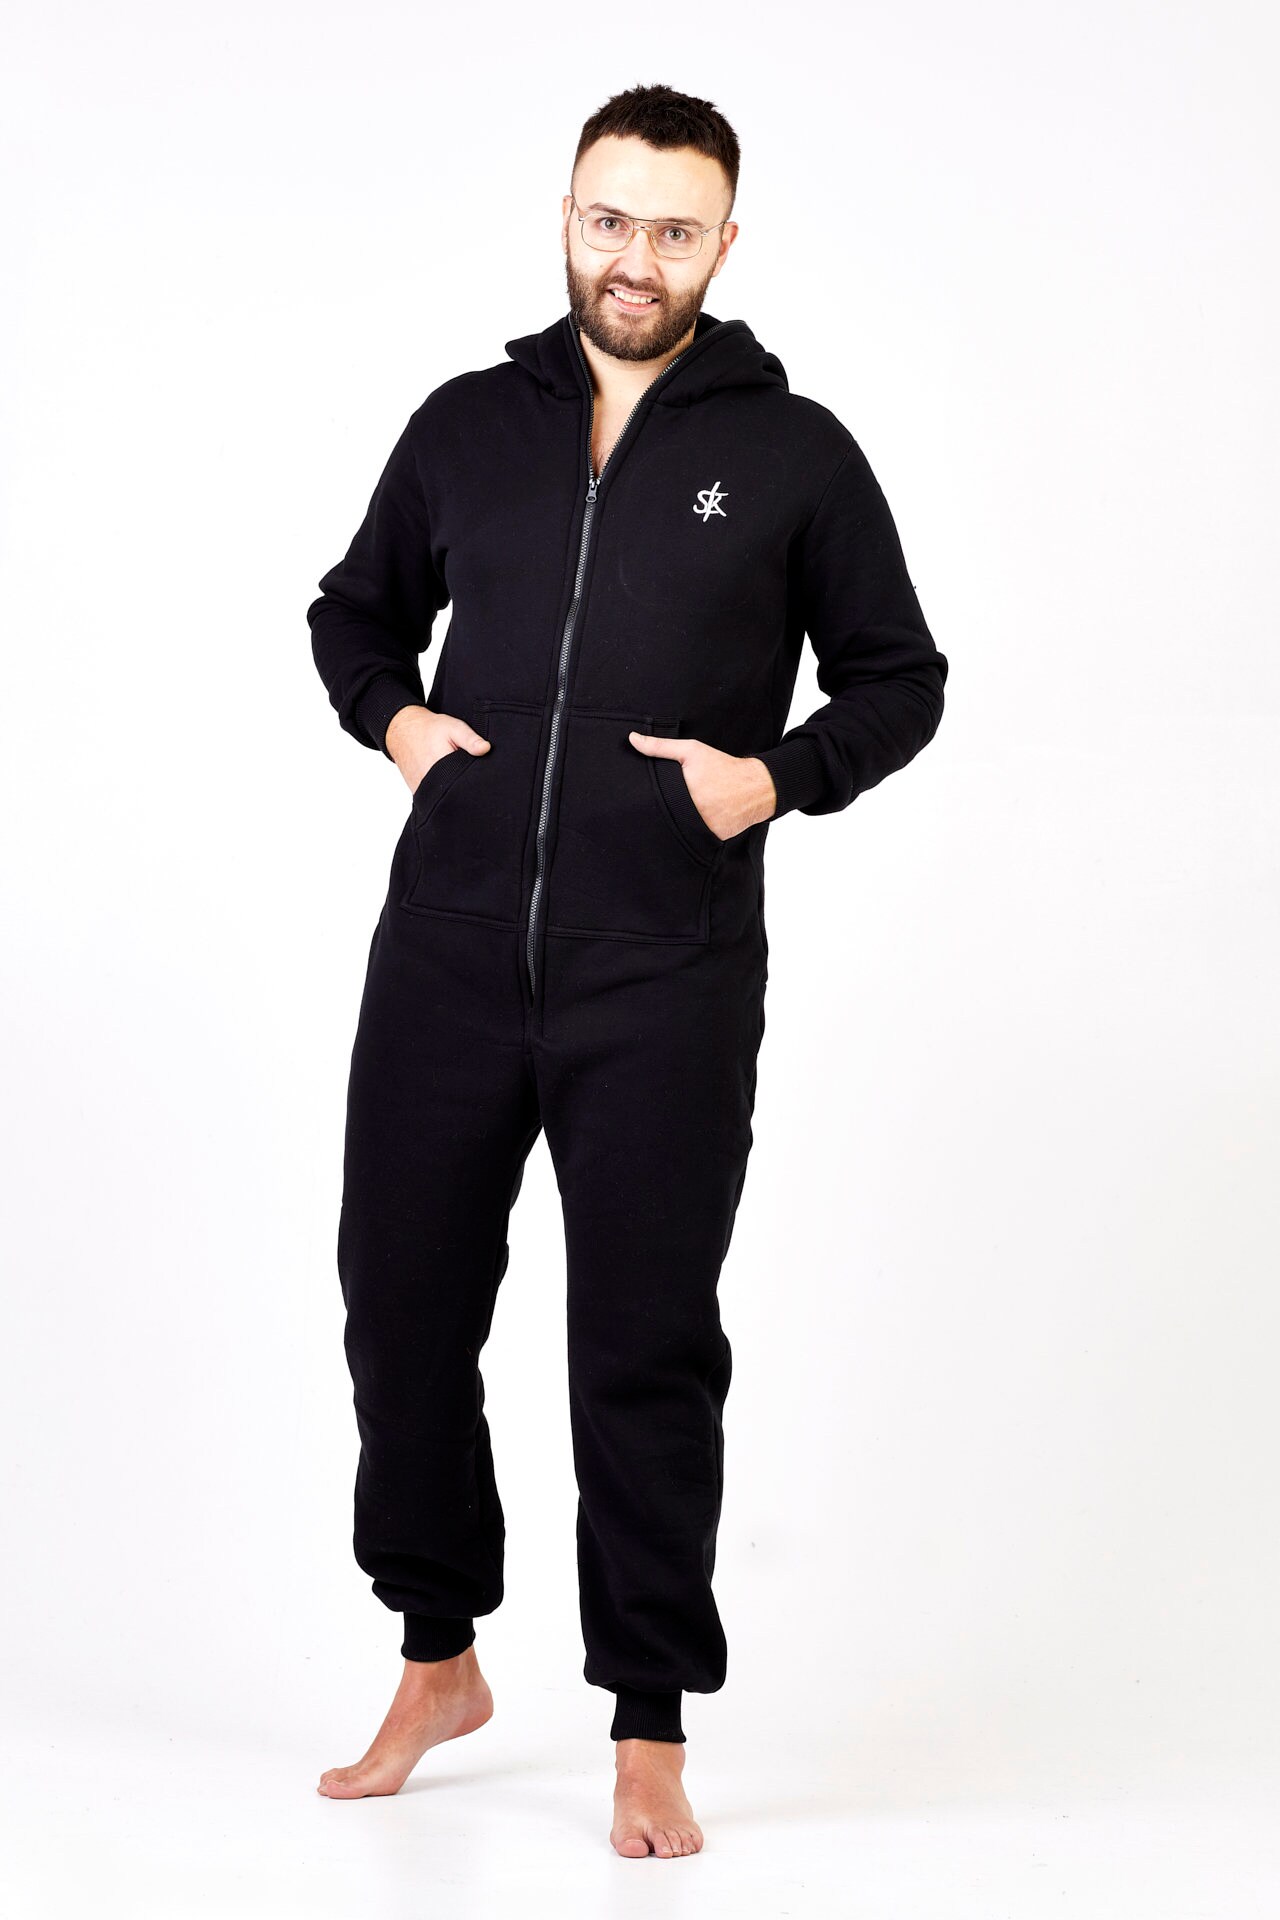 Specialisere udbytte flov Adult Overall Black Overall Men Jumpsuit Overallpajama - Etsy Norway